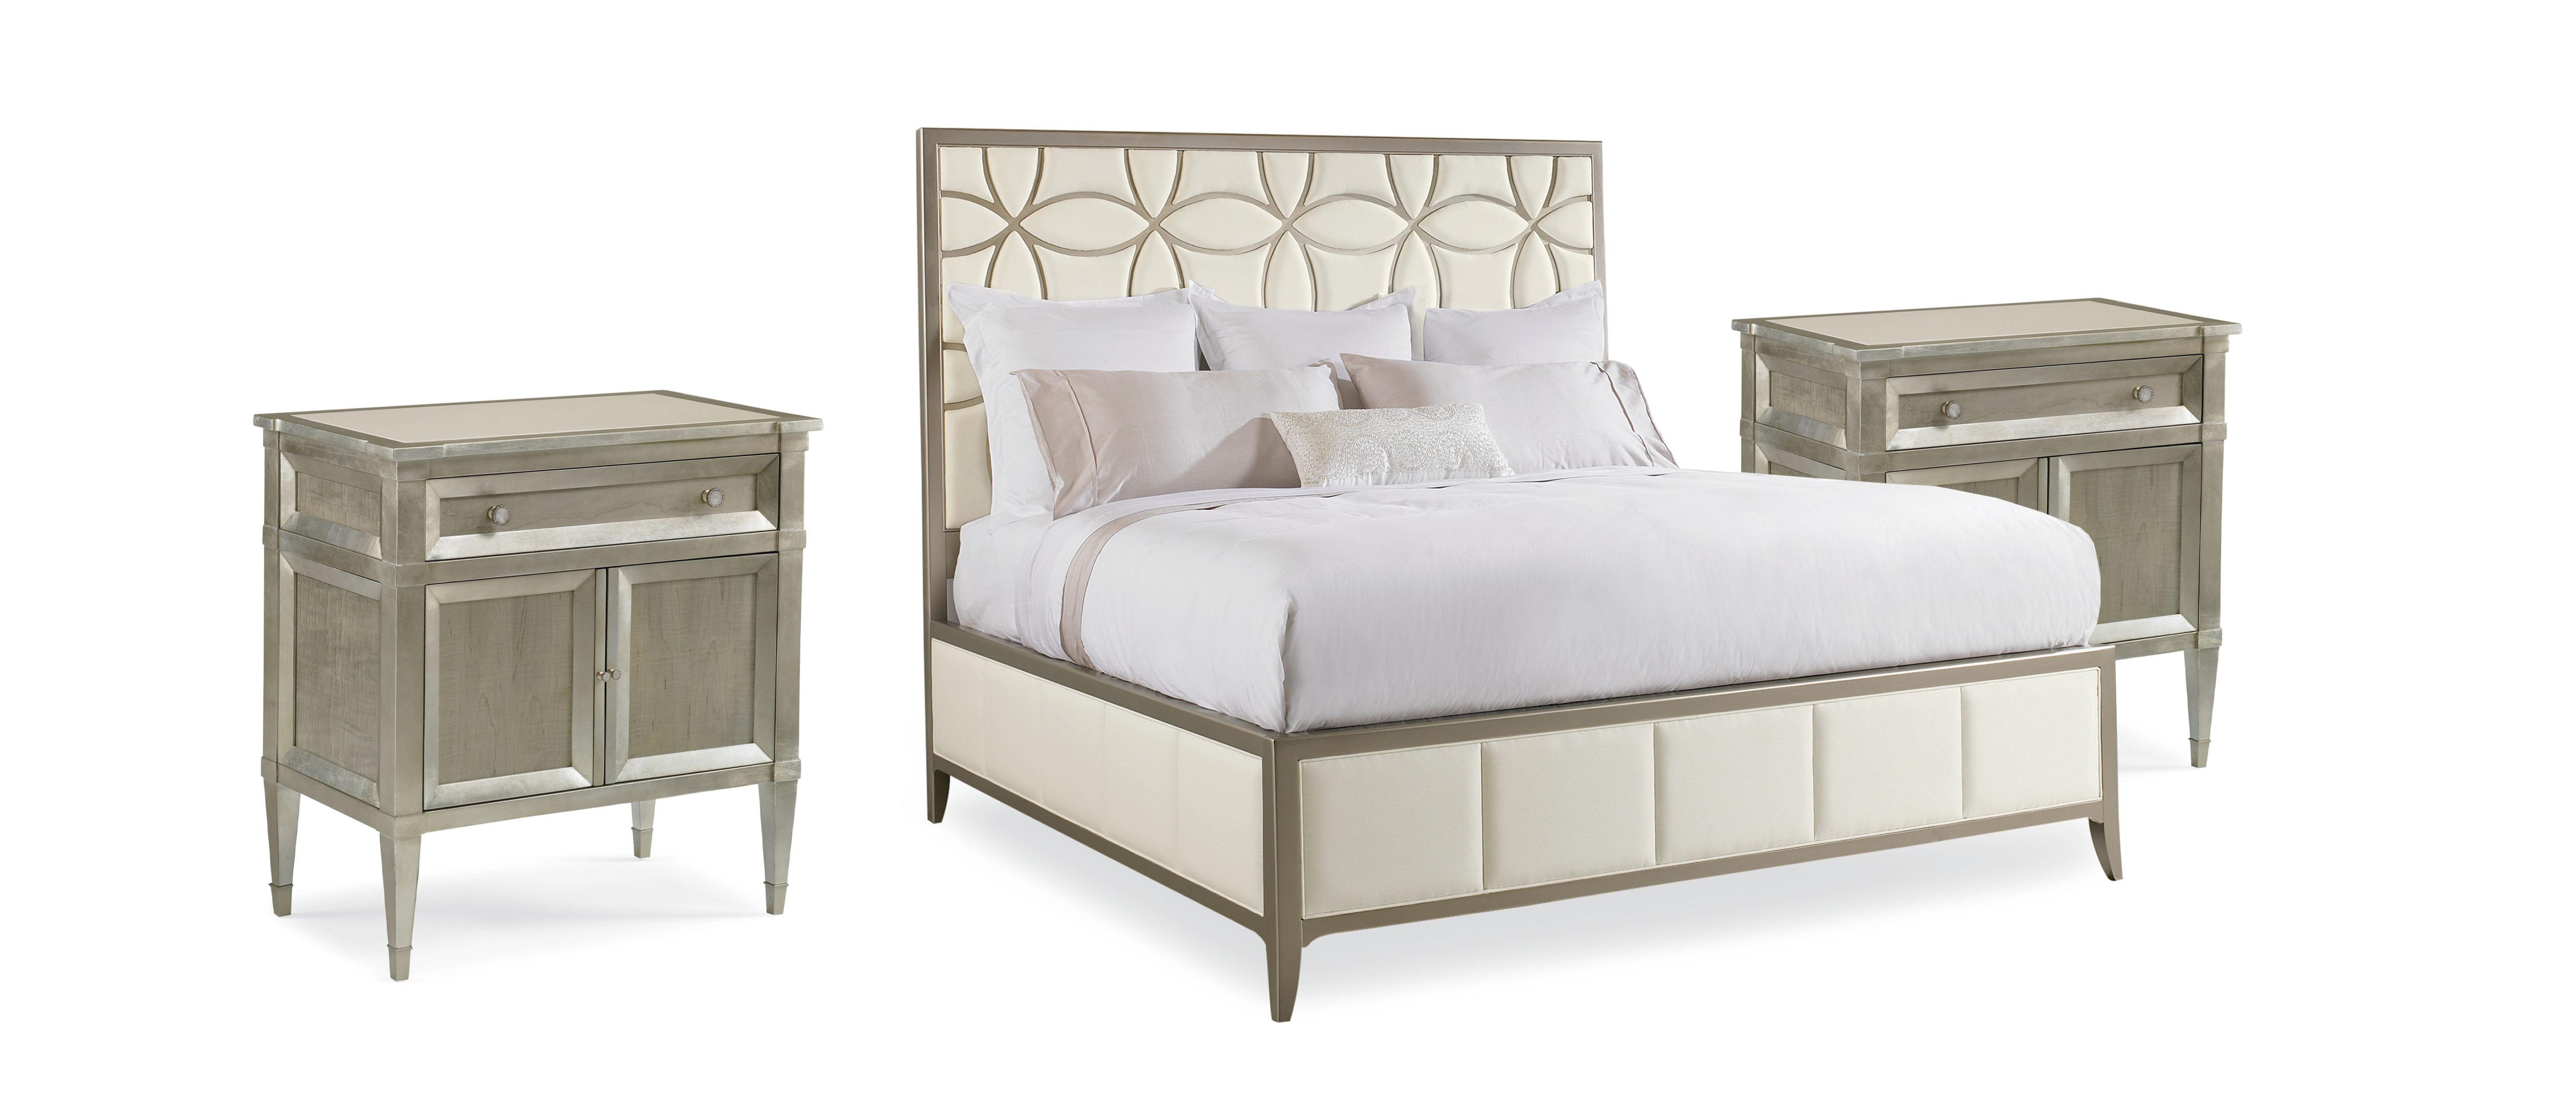 

    
Trellis Pattern Headboard White & Taupe Finish Queen Bed Set 3Pcs SLEEPING BEAUTY / BUONA NOTTE by Caracole
